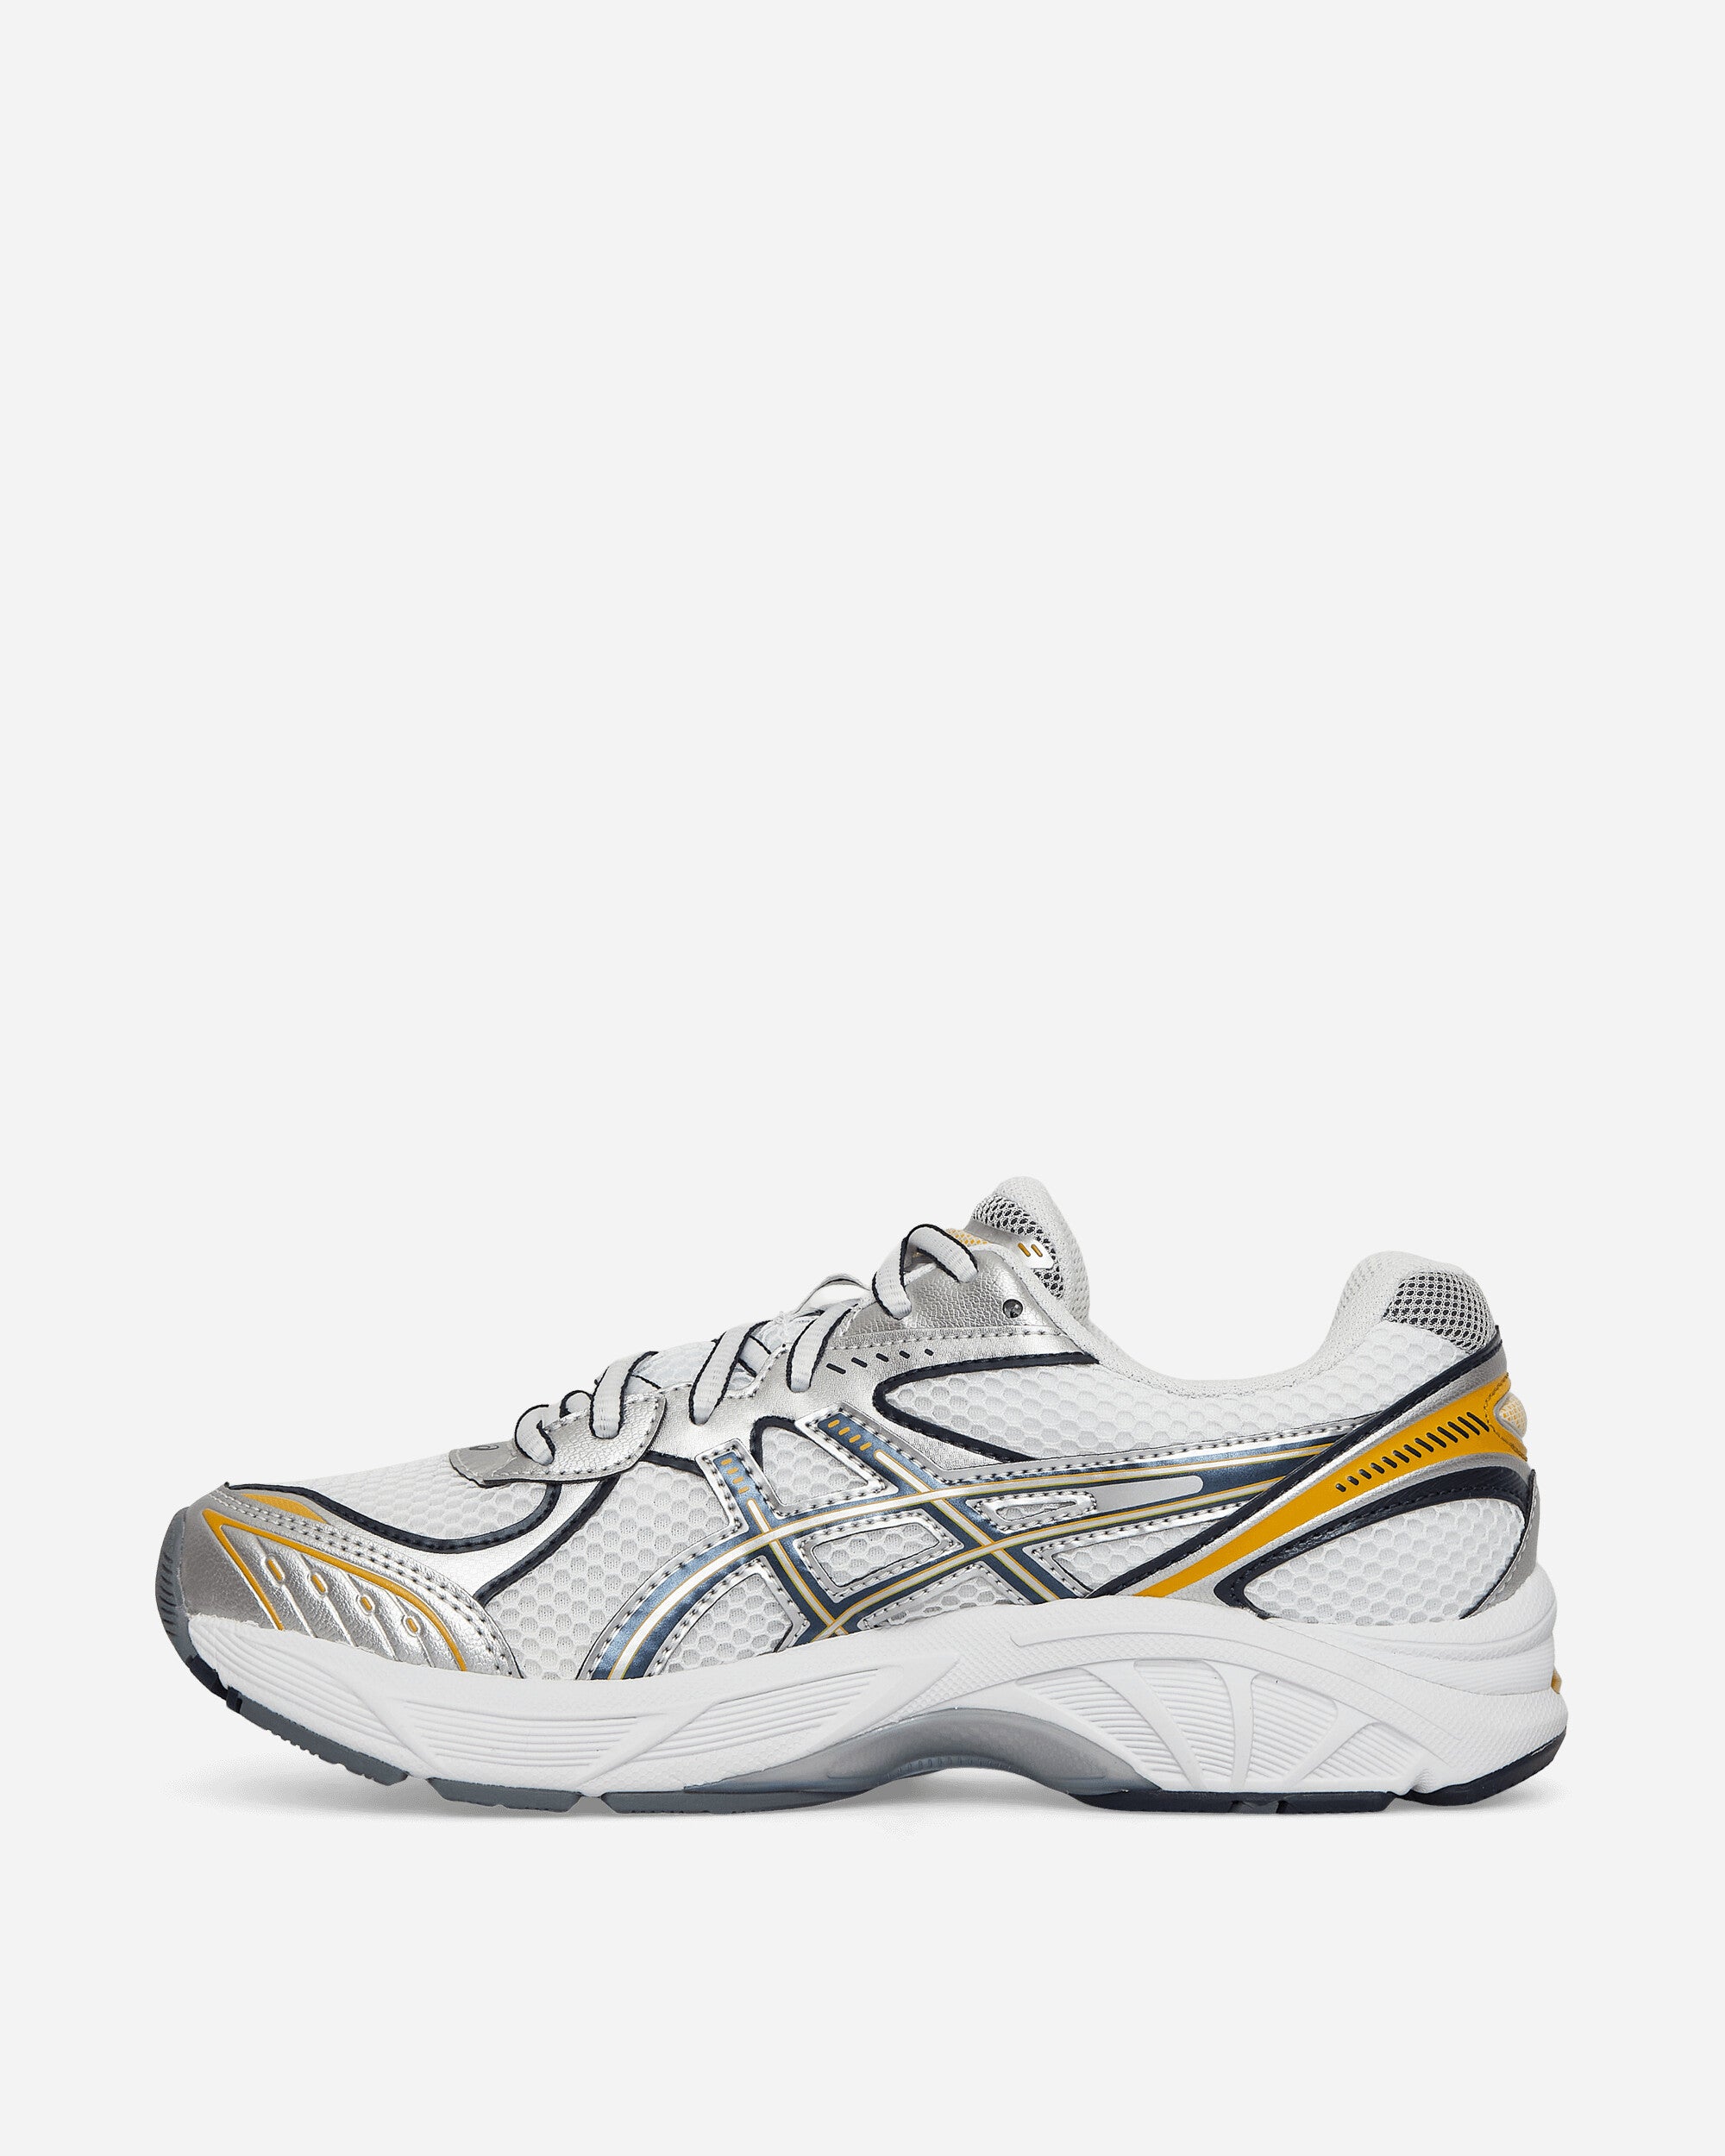 Asics Gt-2160 White/Pure Silver Sneakers Low 1203A275-102